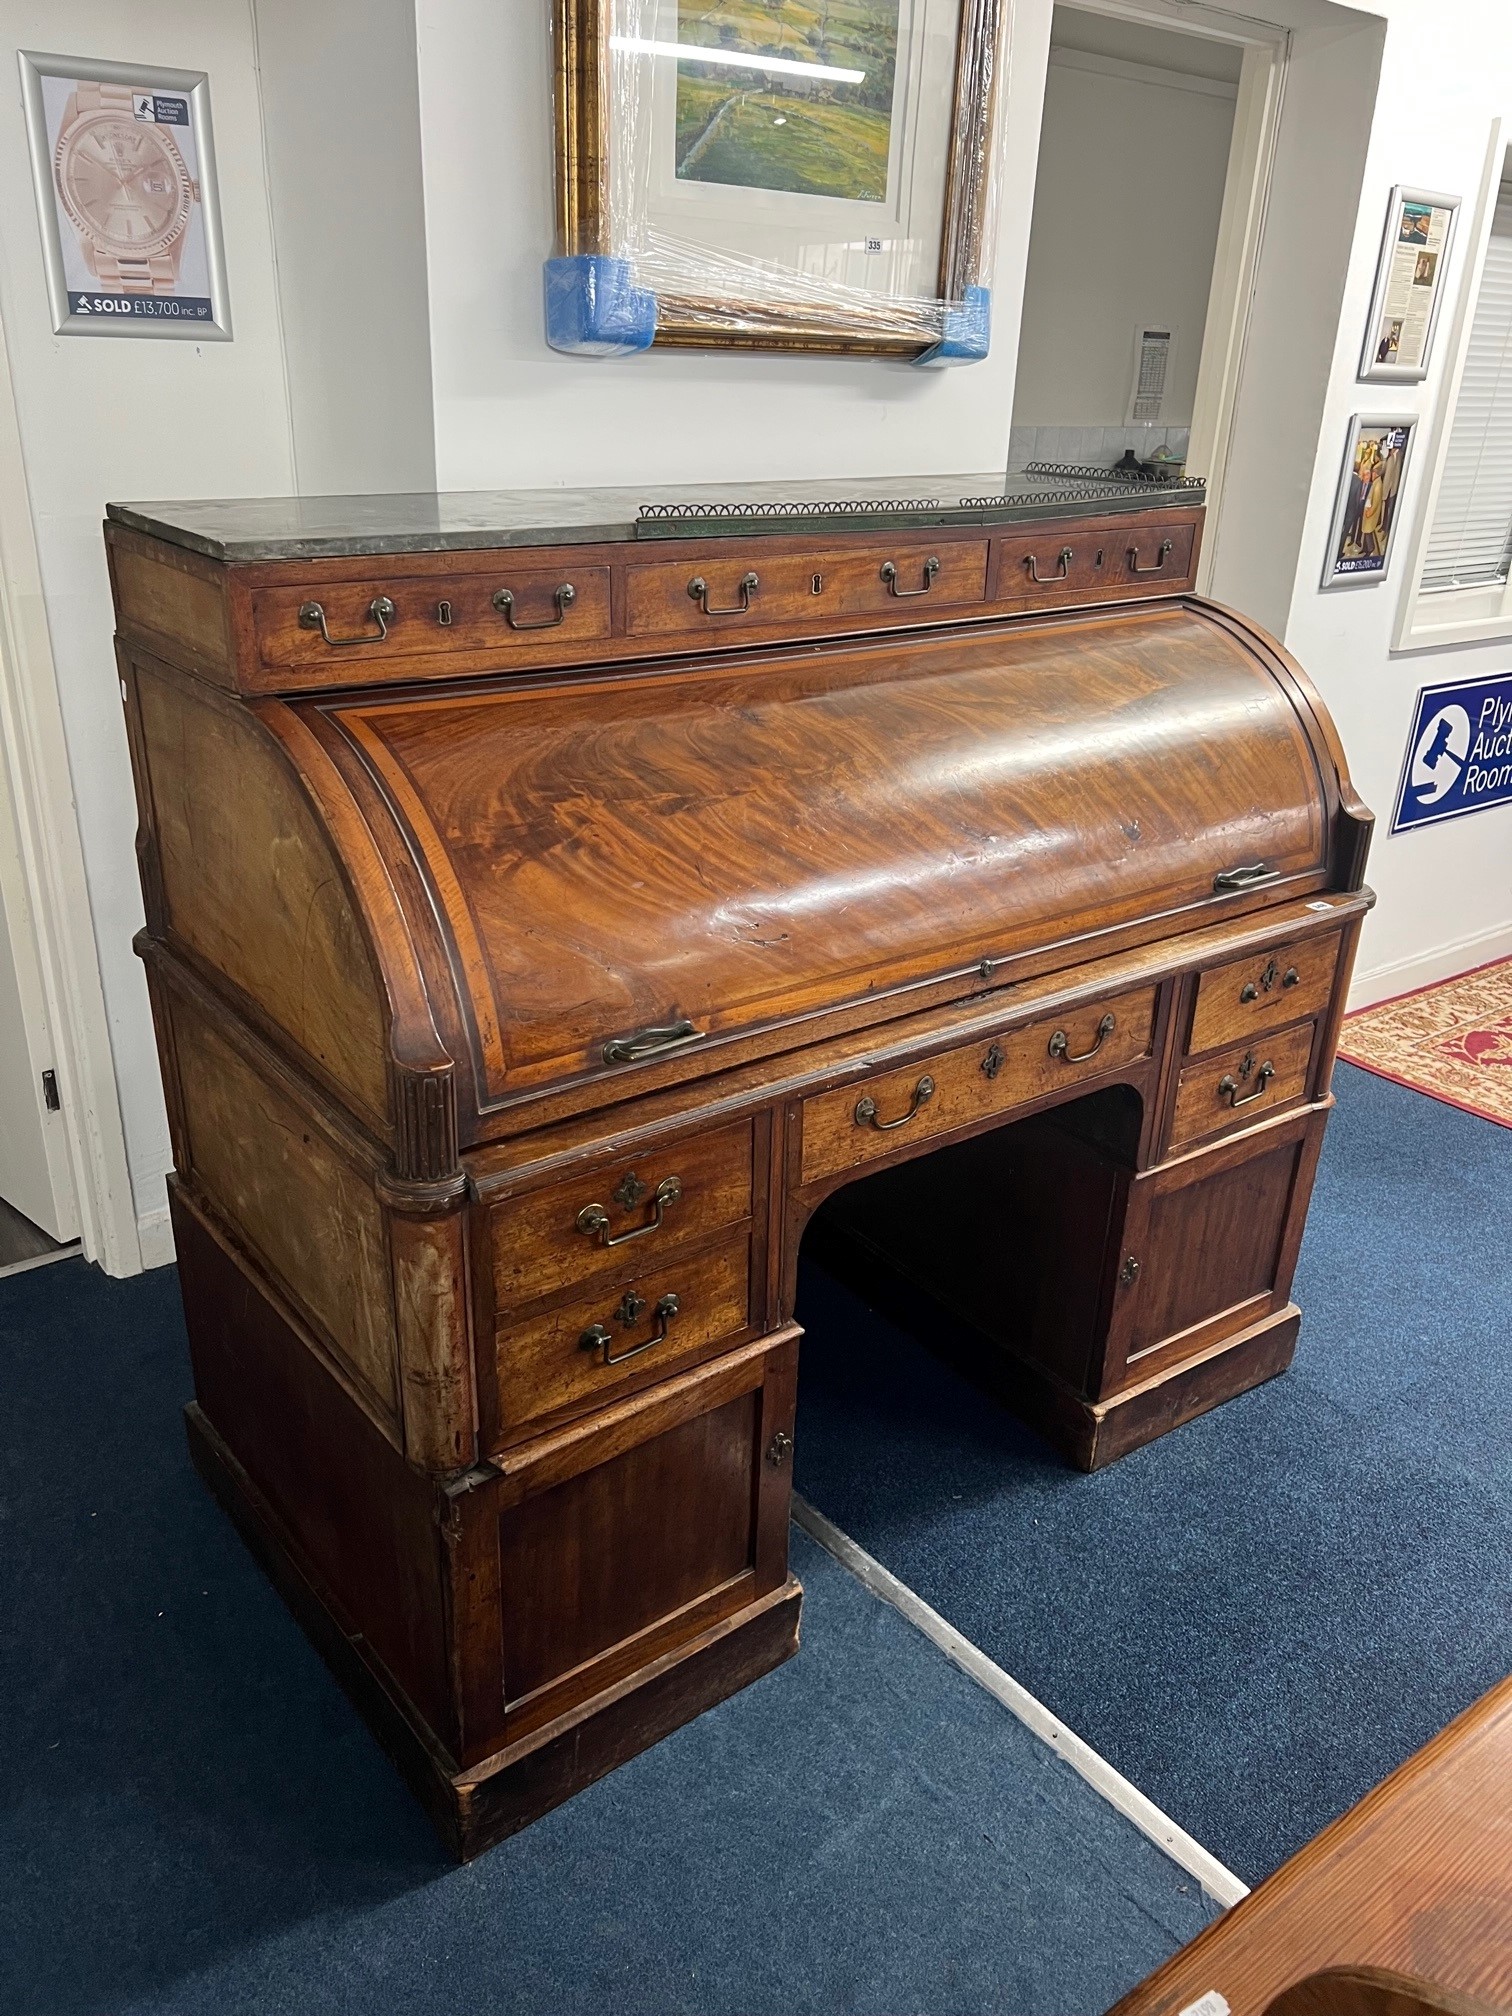 A large Louis XVI style mahogany cylinder bureau fitted with an arrangement of drawers and Pidgeon